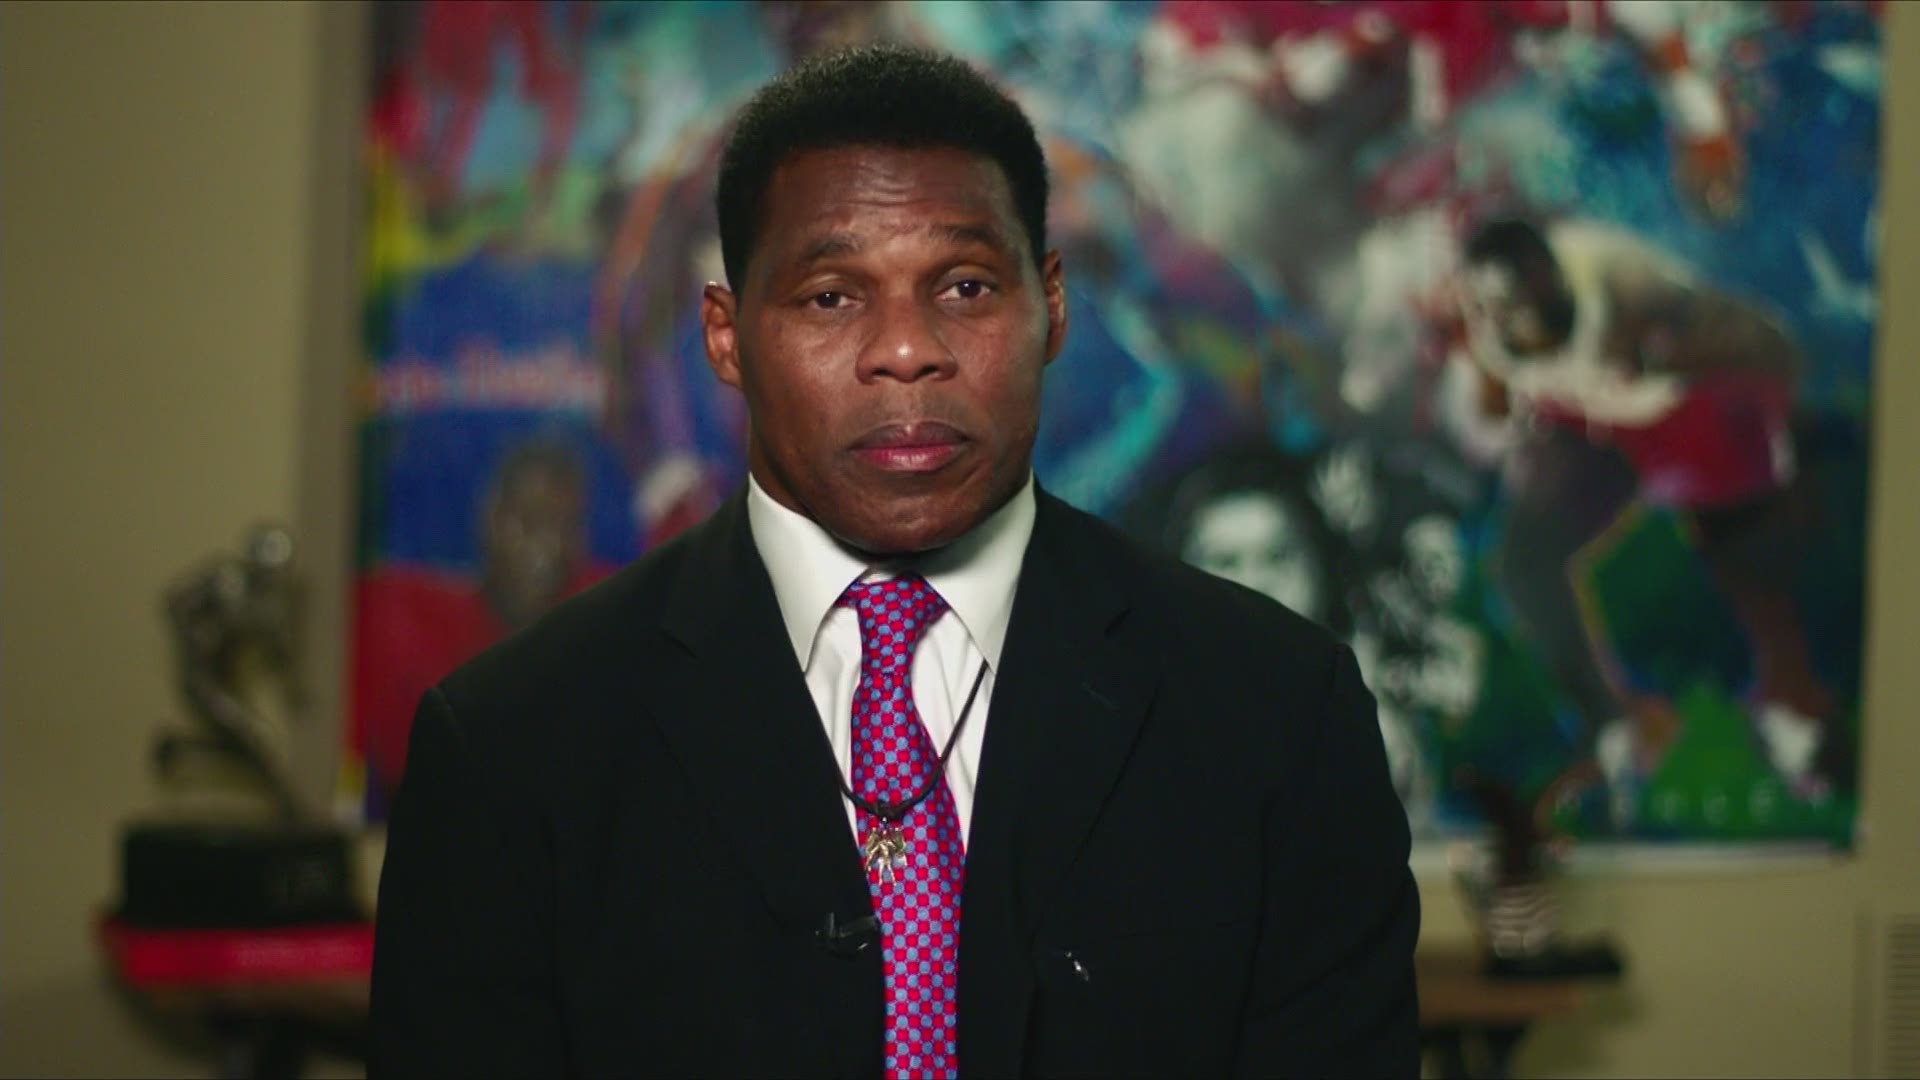 During his speech at the RNC, former football player Herschel Walker said he considers it a 'personal insult' when people claim President Donald Trump is racist.